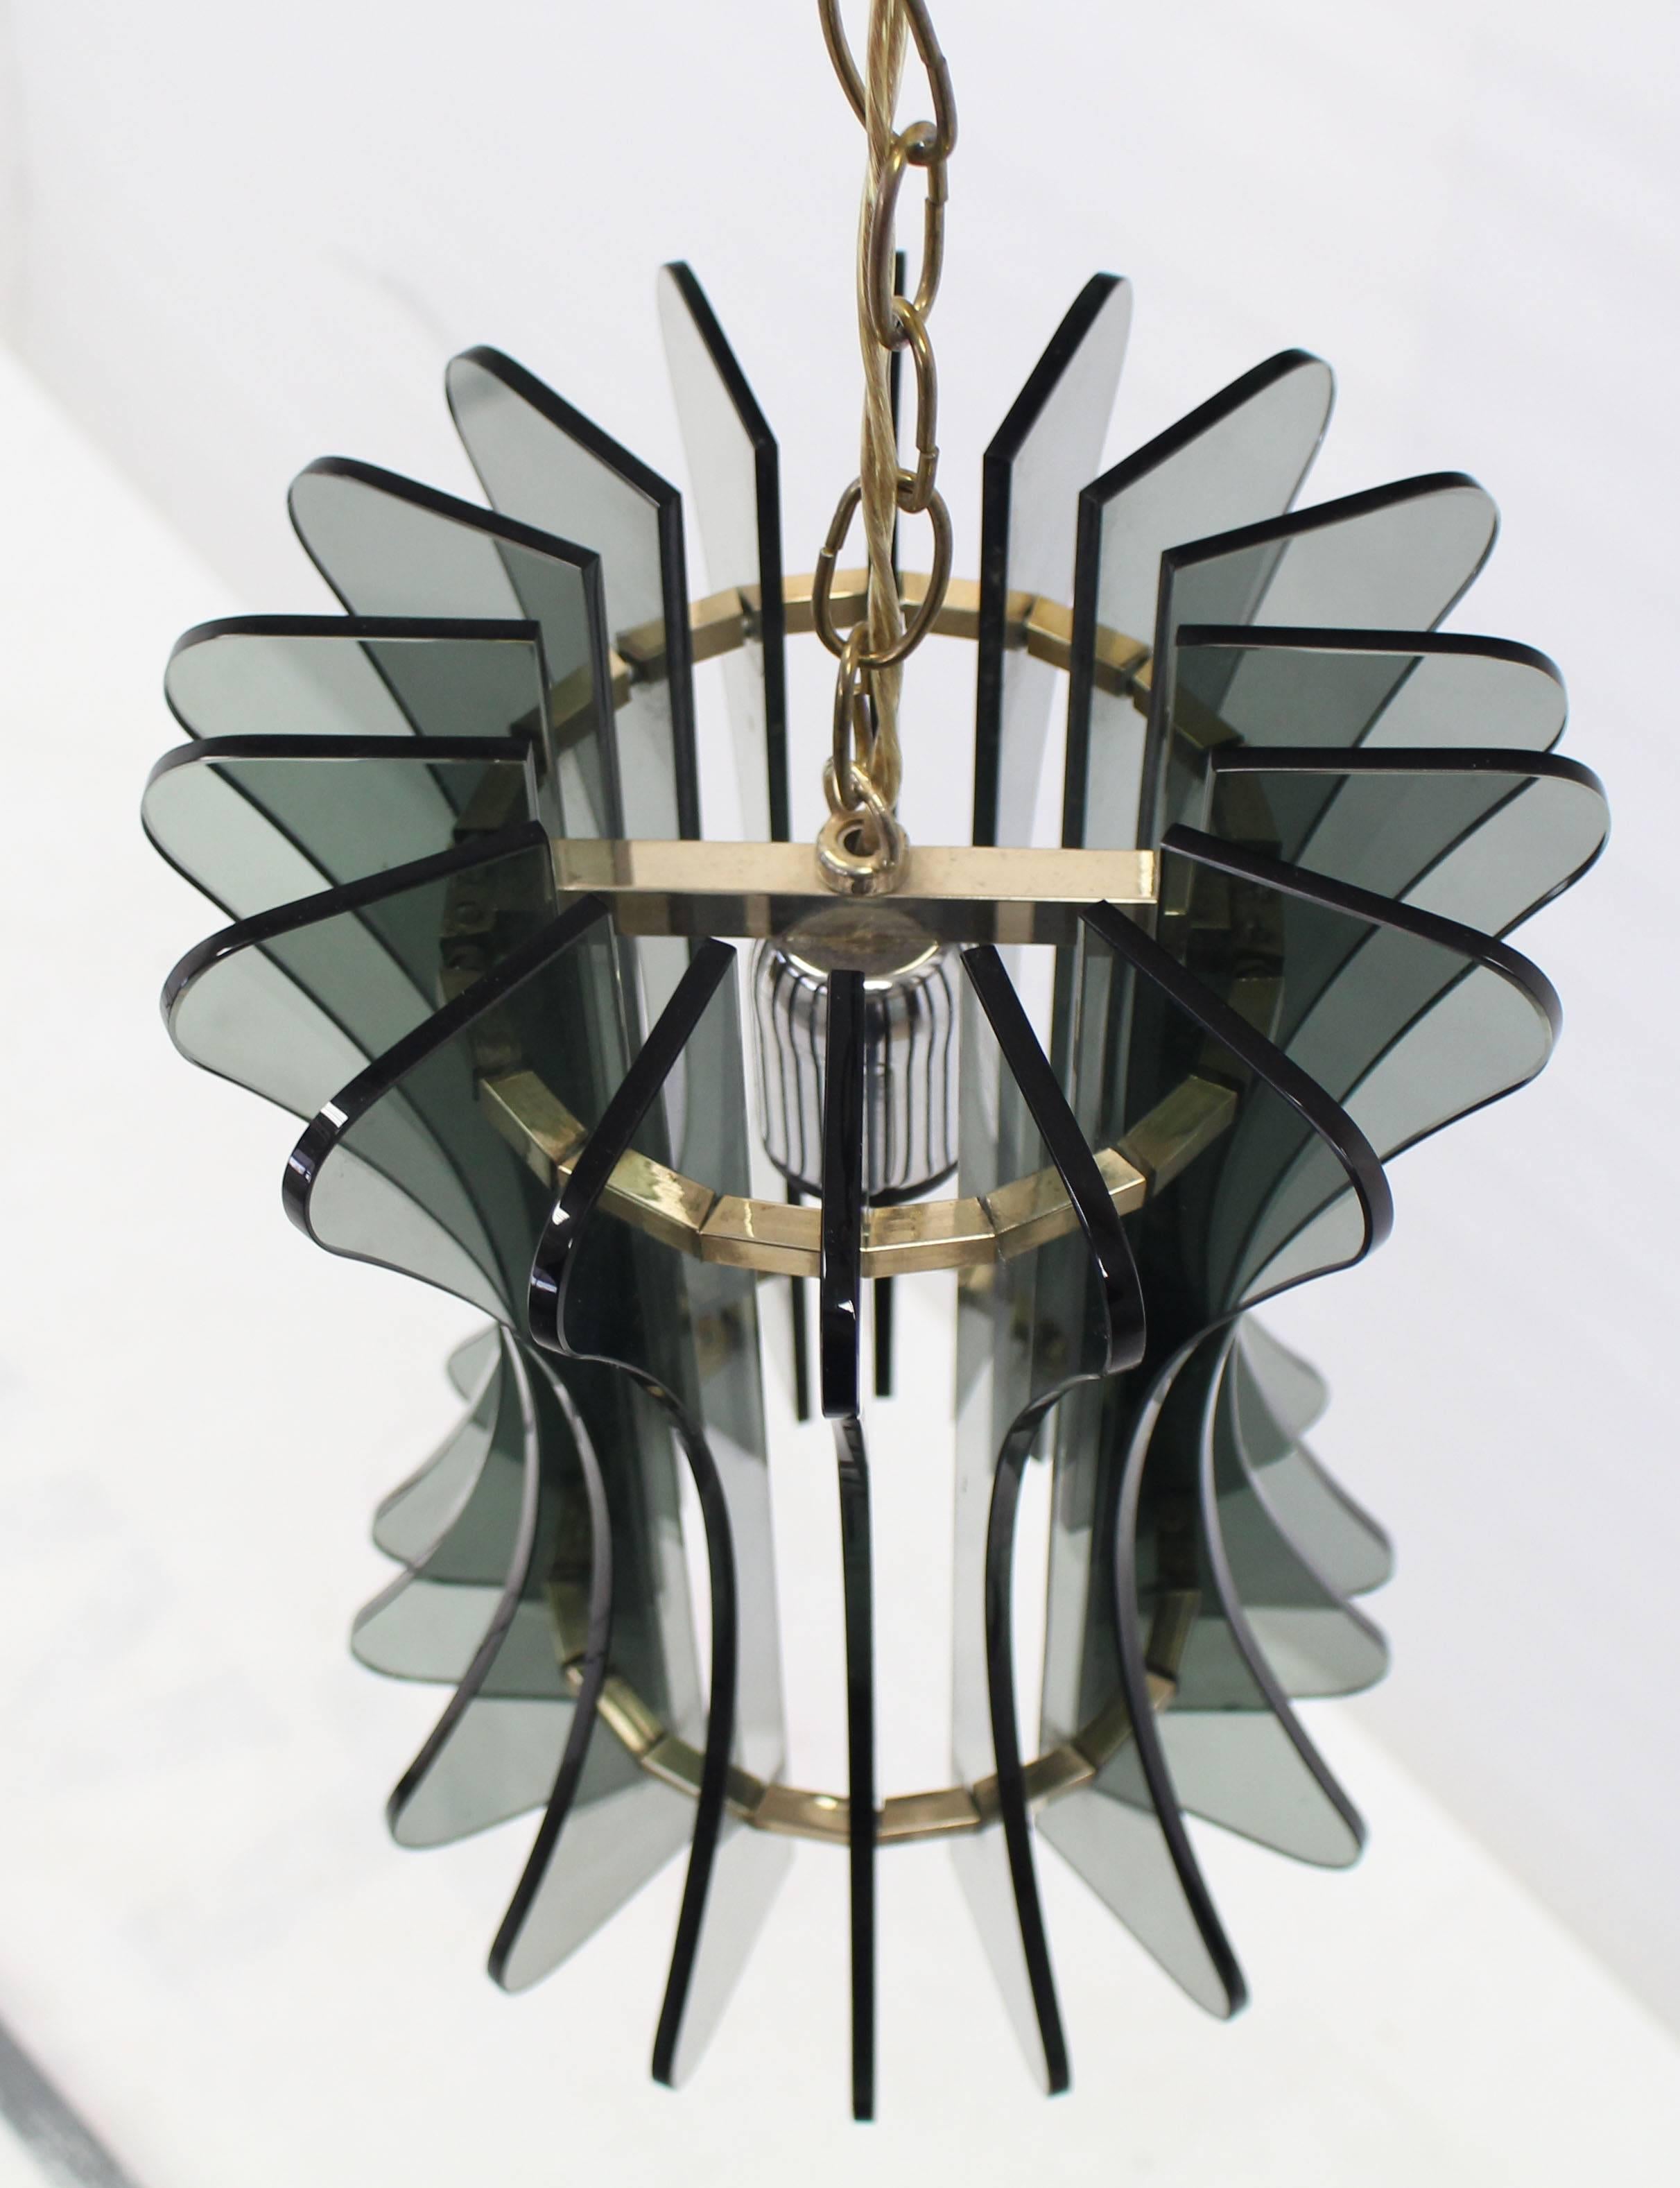 Smoked glass and gold metal Mid-Century Modern chandelier by Veca.